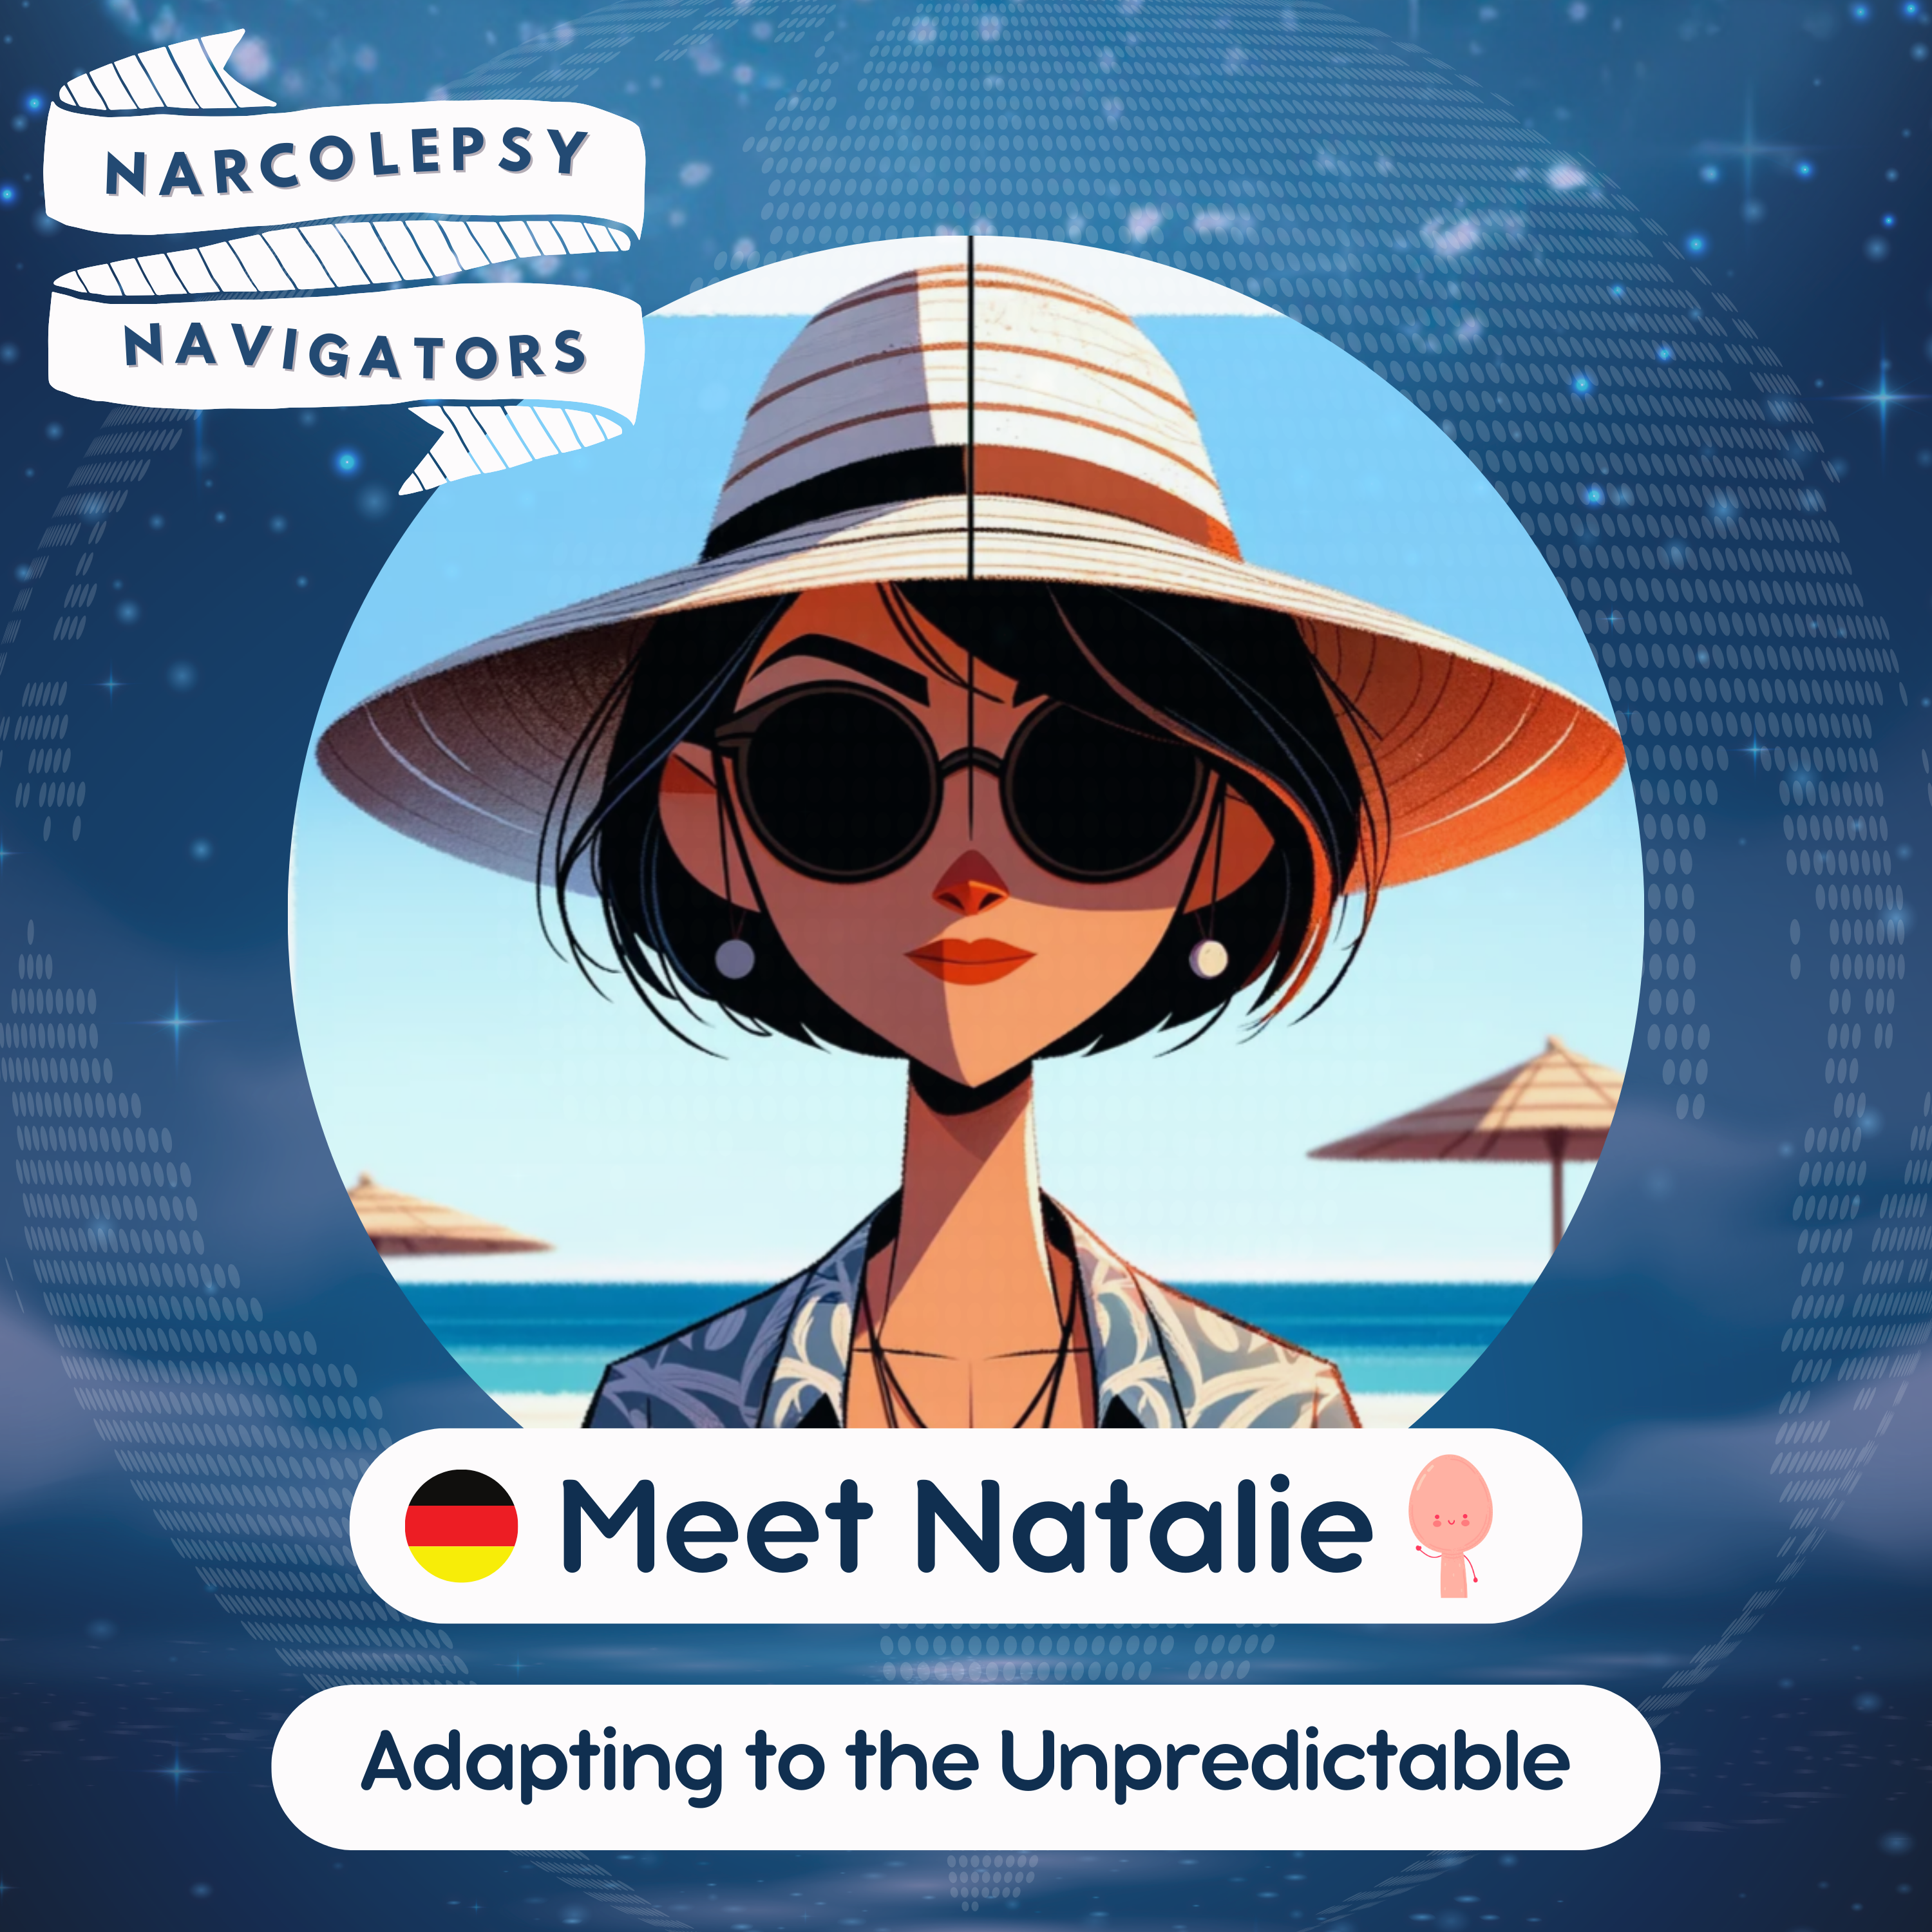 Adapting to the Unpredictable: Natalie's Narrative